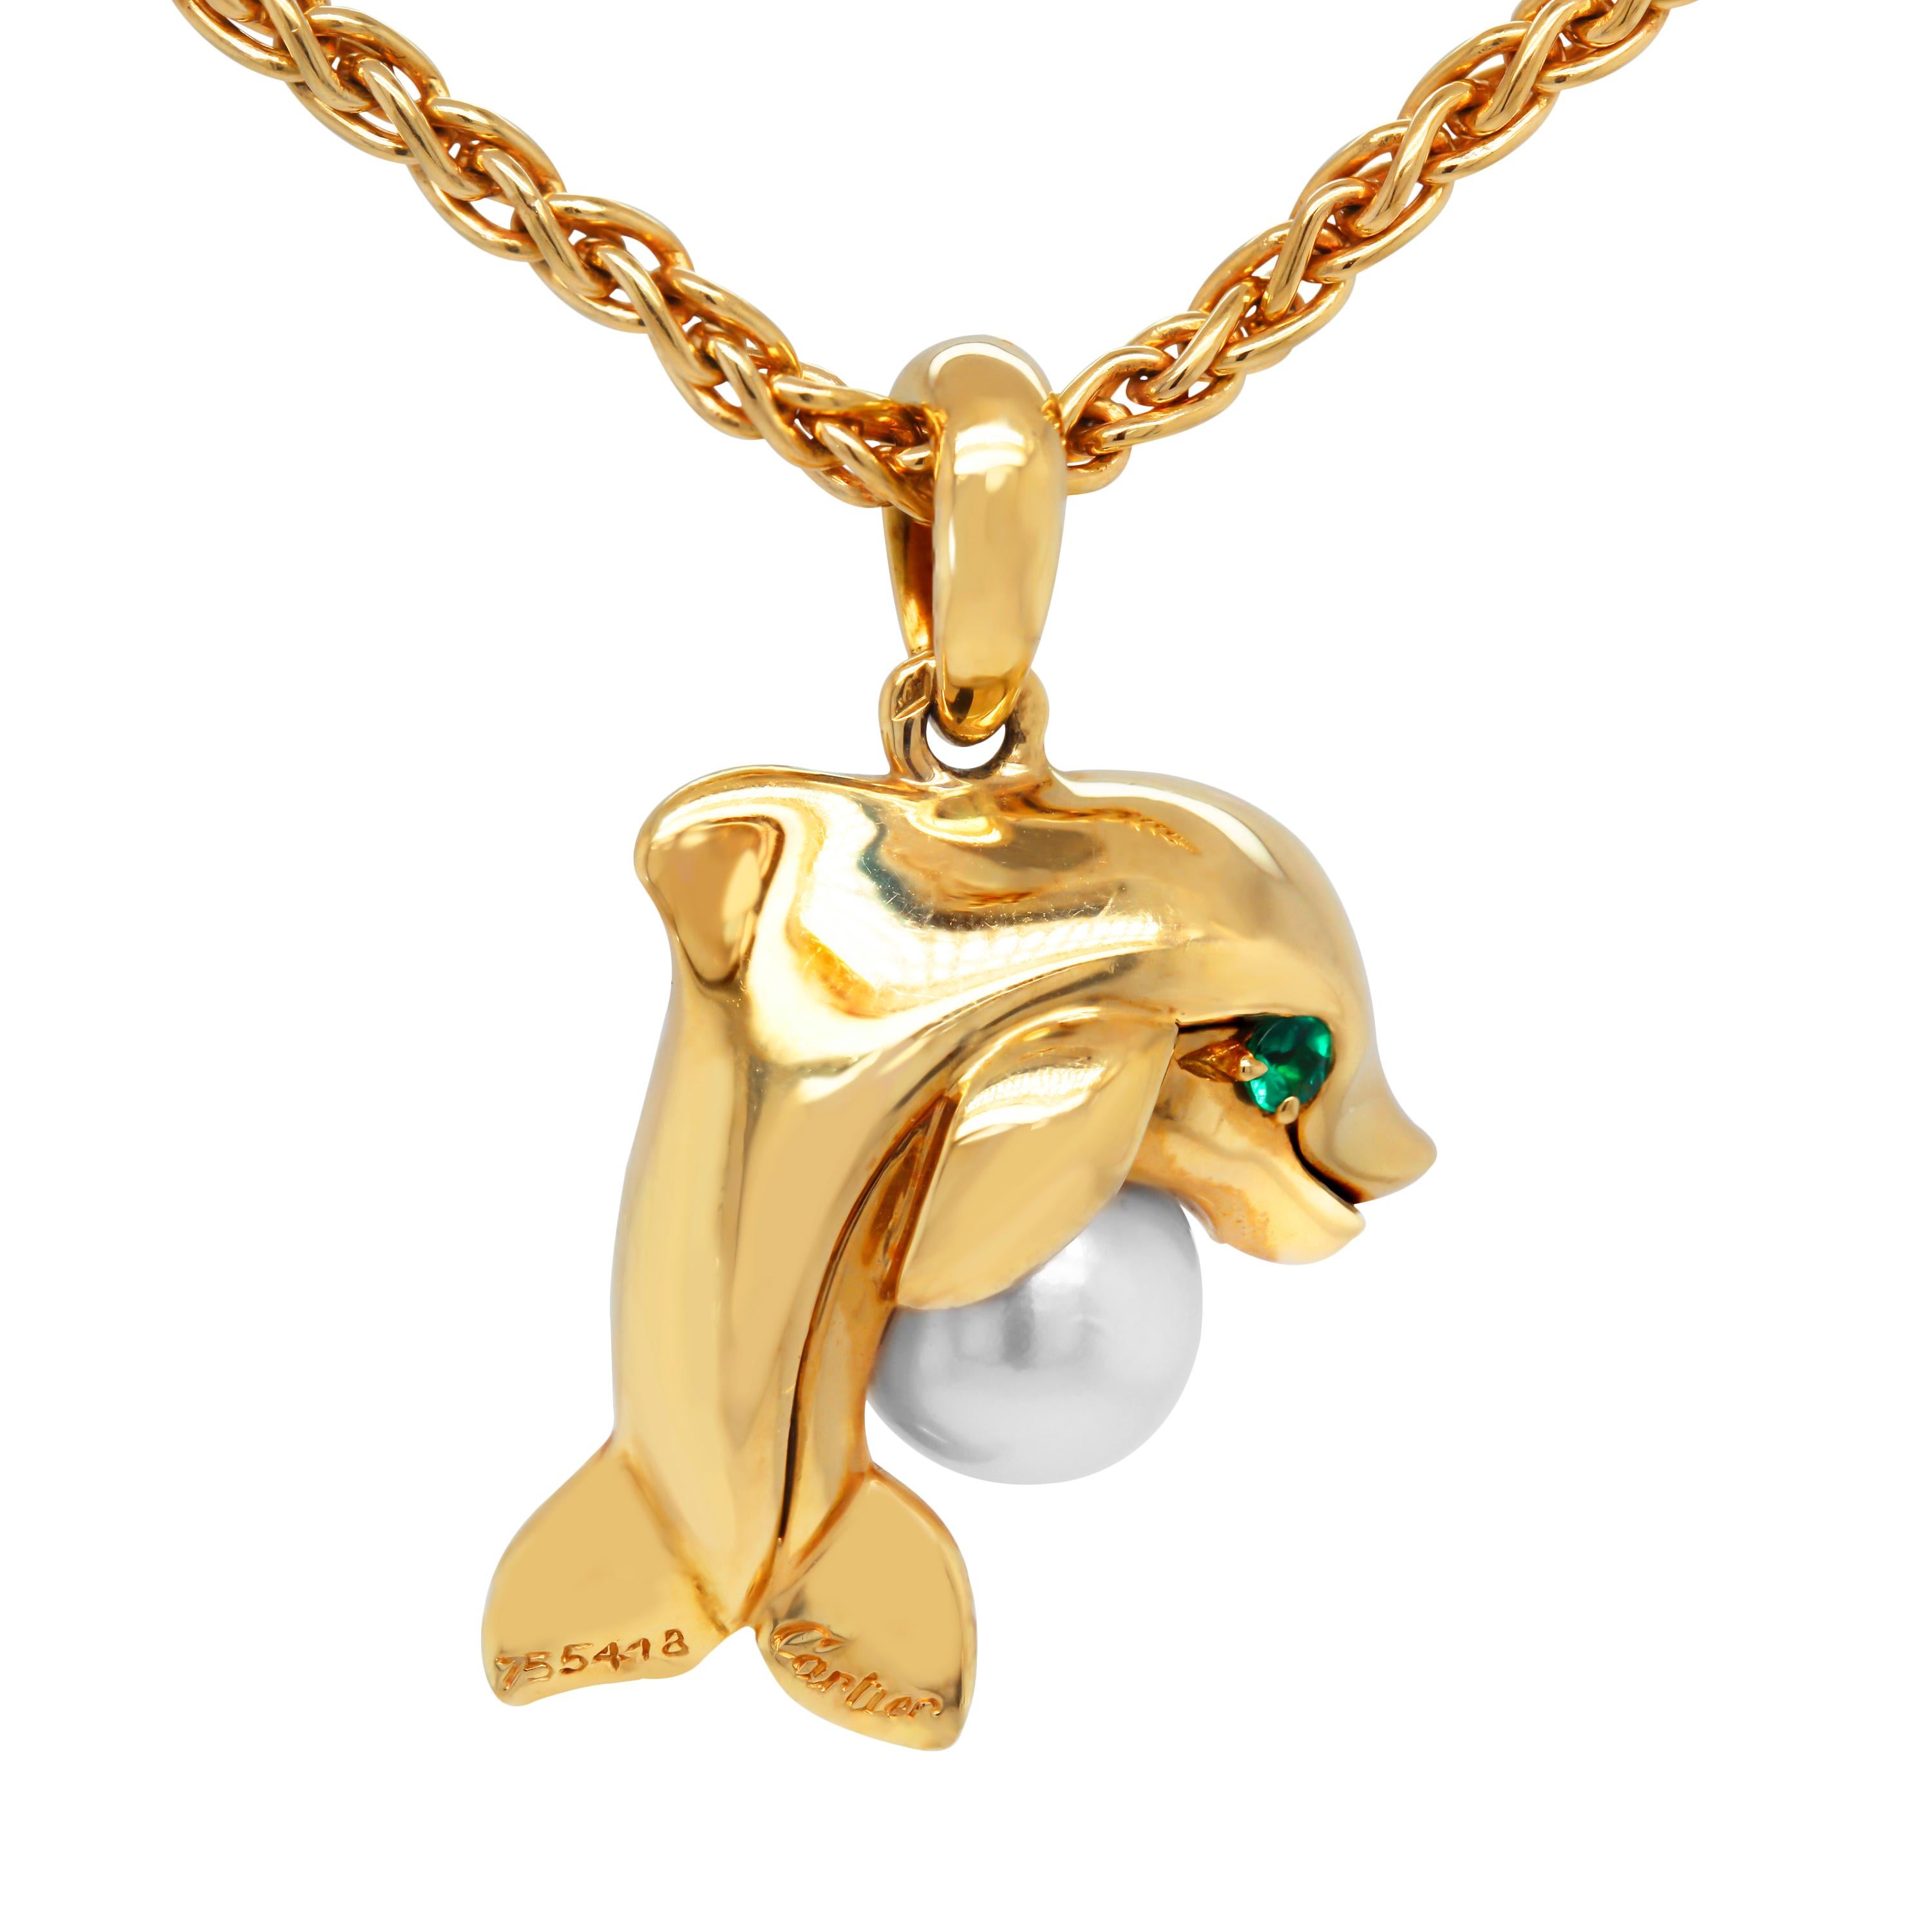 Cartier 18K Yellow Gold Pearl Emerald Dolphin Pendant Necklace

Eyes of the dolphin are Emeralds with a round pearl being held.

Pendant is 1.04 inch in length by 0.57 inch width.
Chain is 16 inches in length.

Signed Cartier